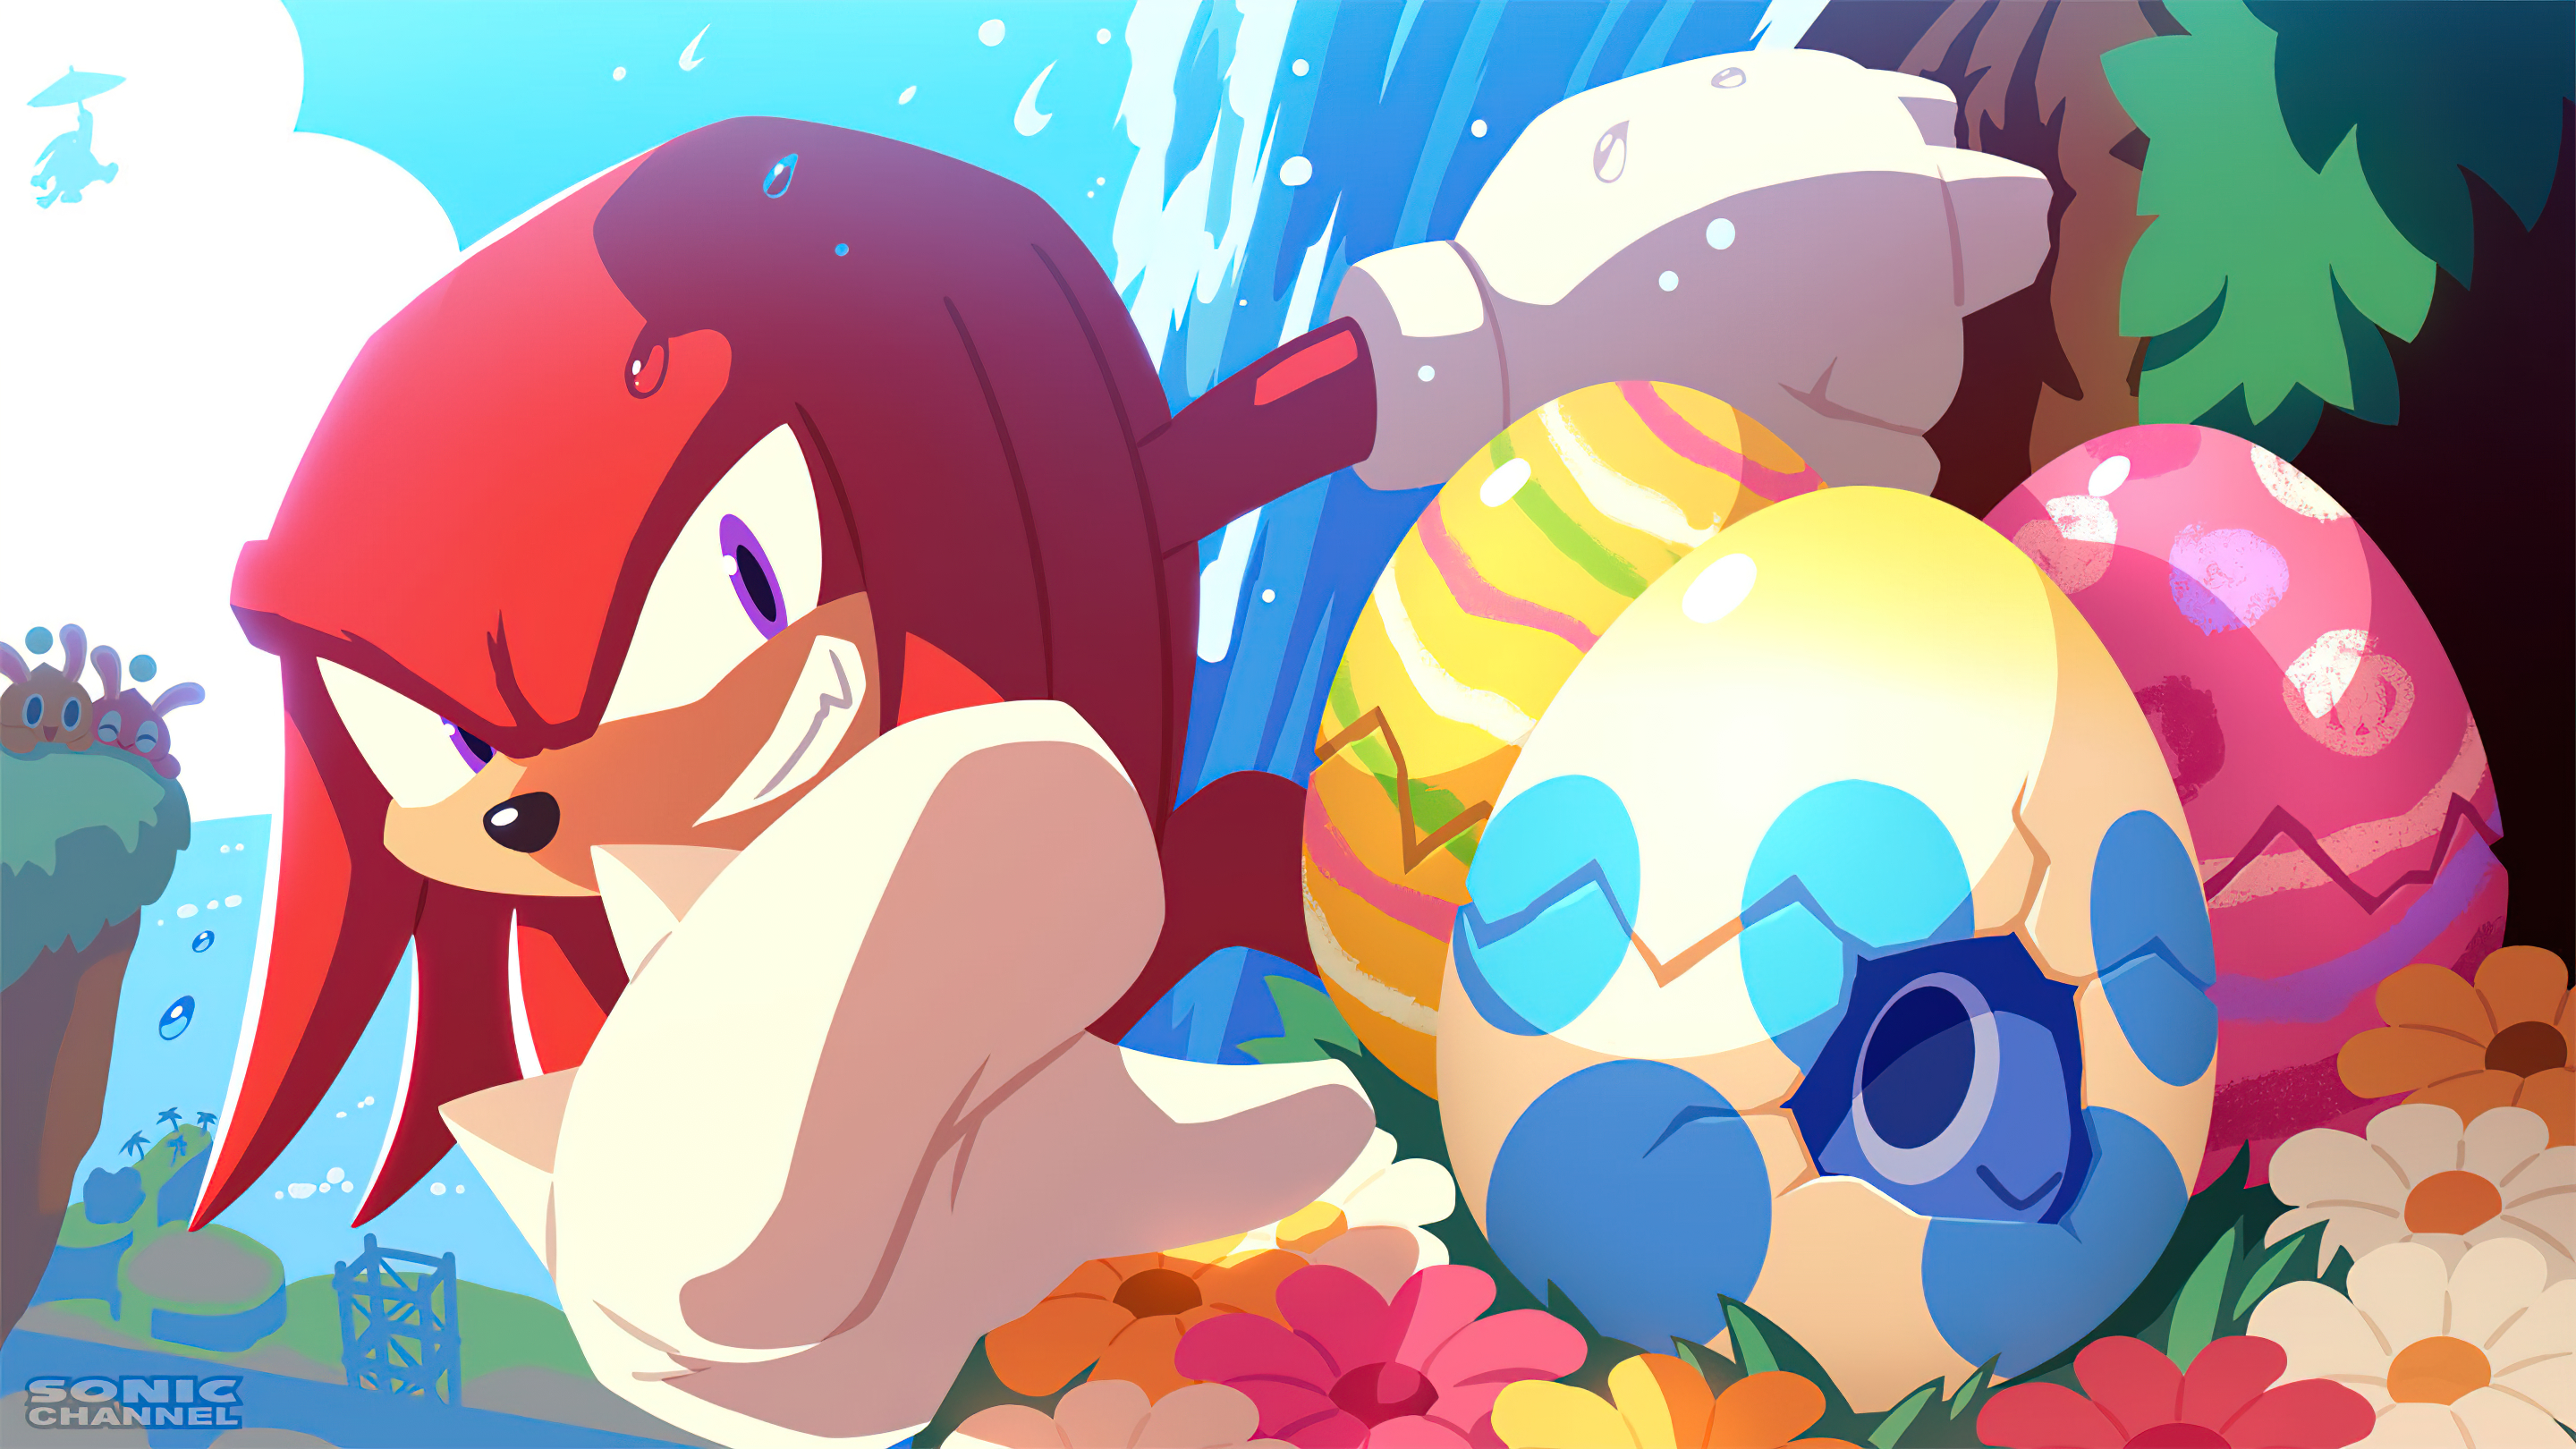 Sonic Sonic The Hedgehog Knuckles Eggs Easter Eggs Easter Holiday Sega PC Gaming Video Game Art Comi 2880x1620